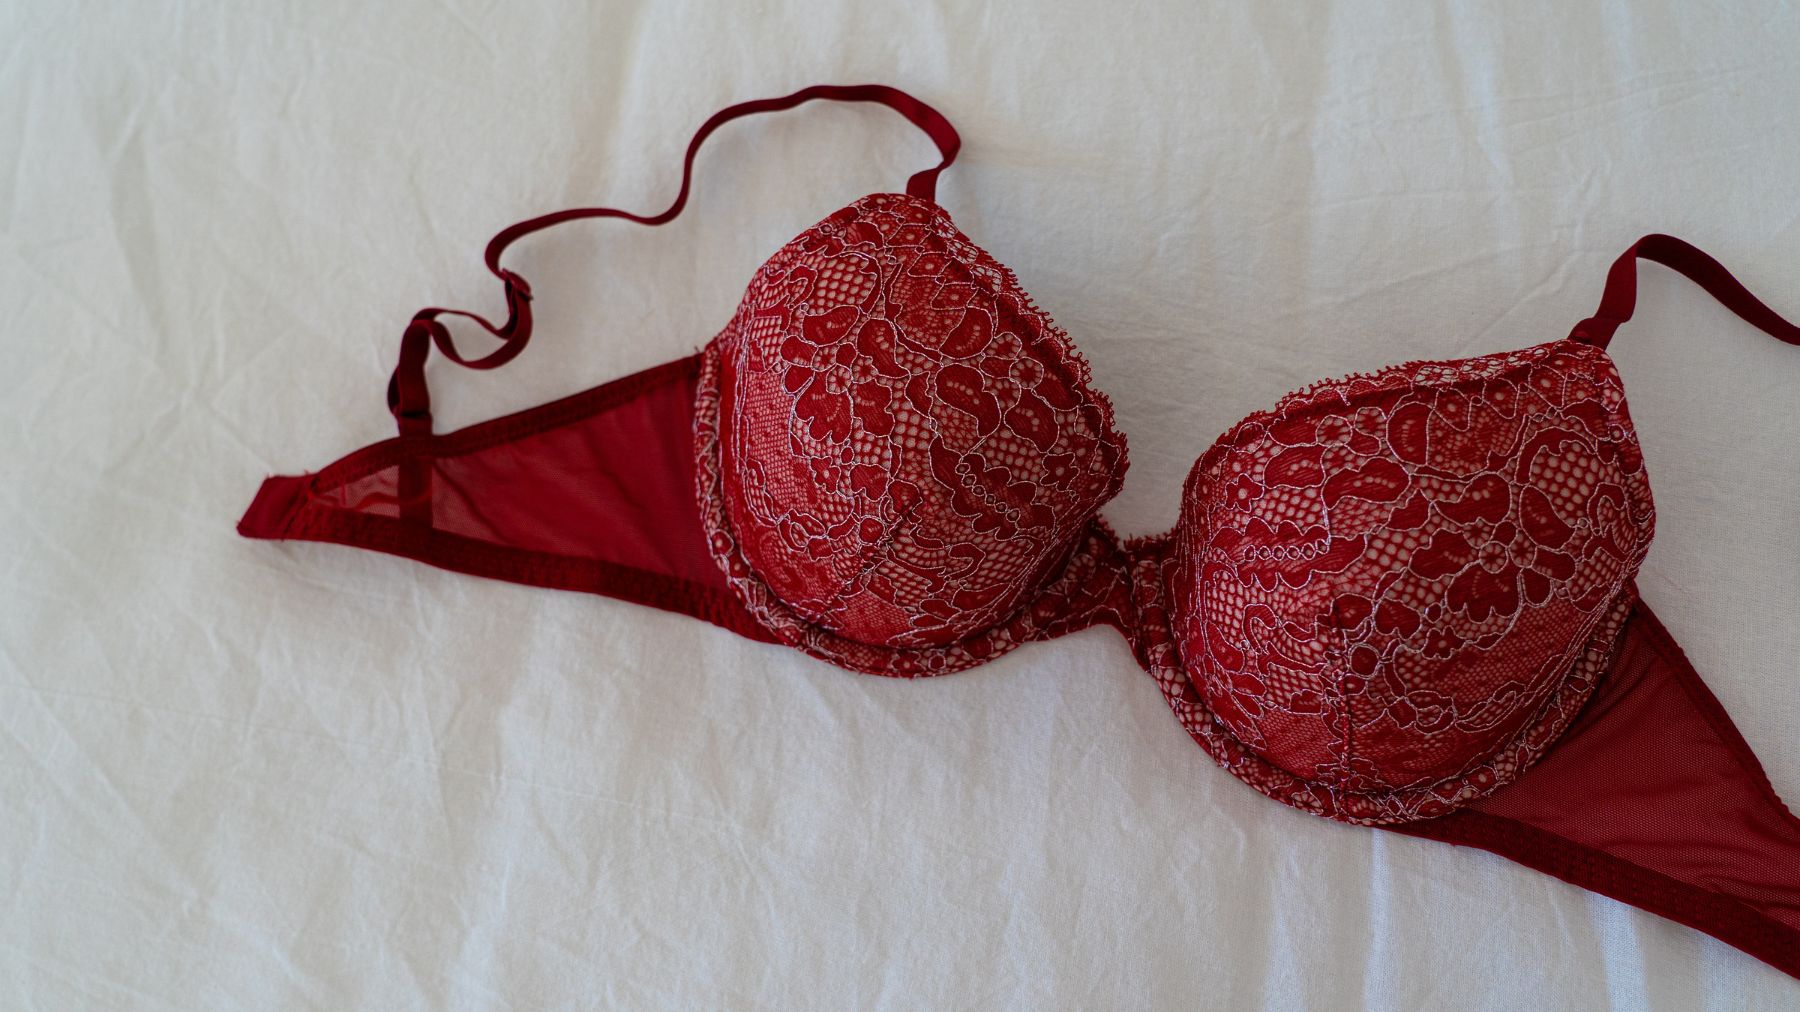 Here are some bra tricks every woman should know